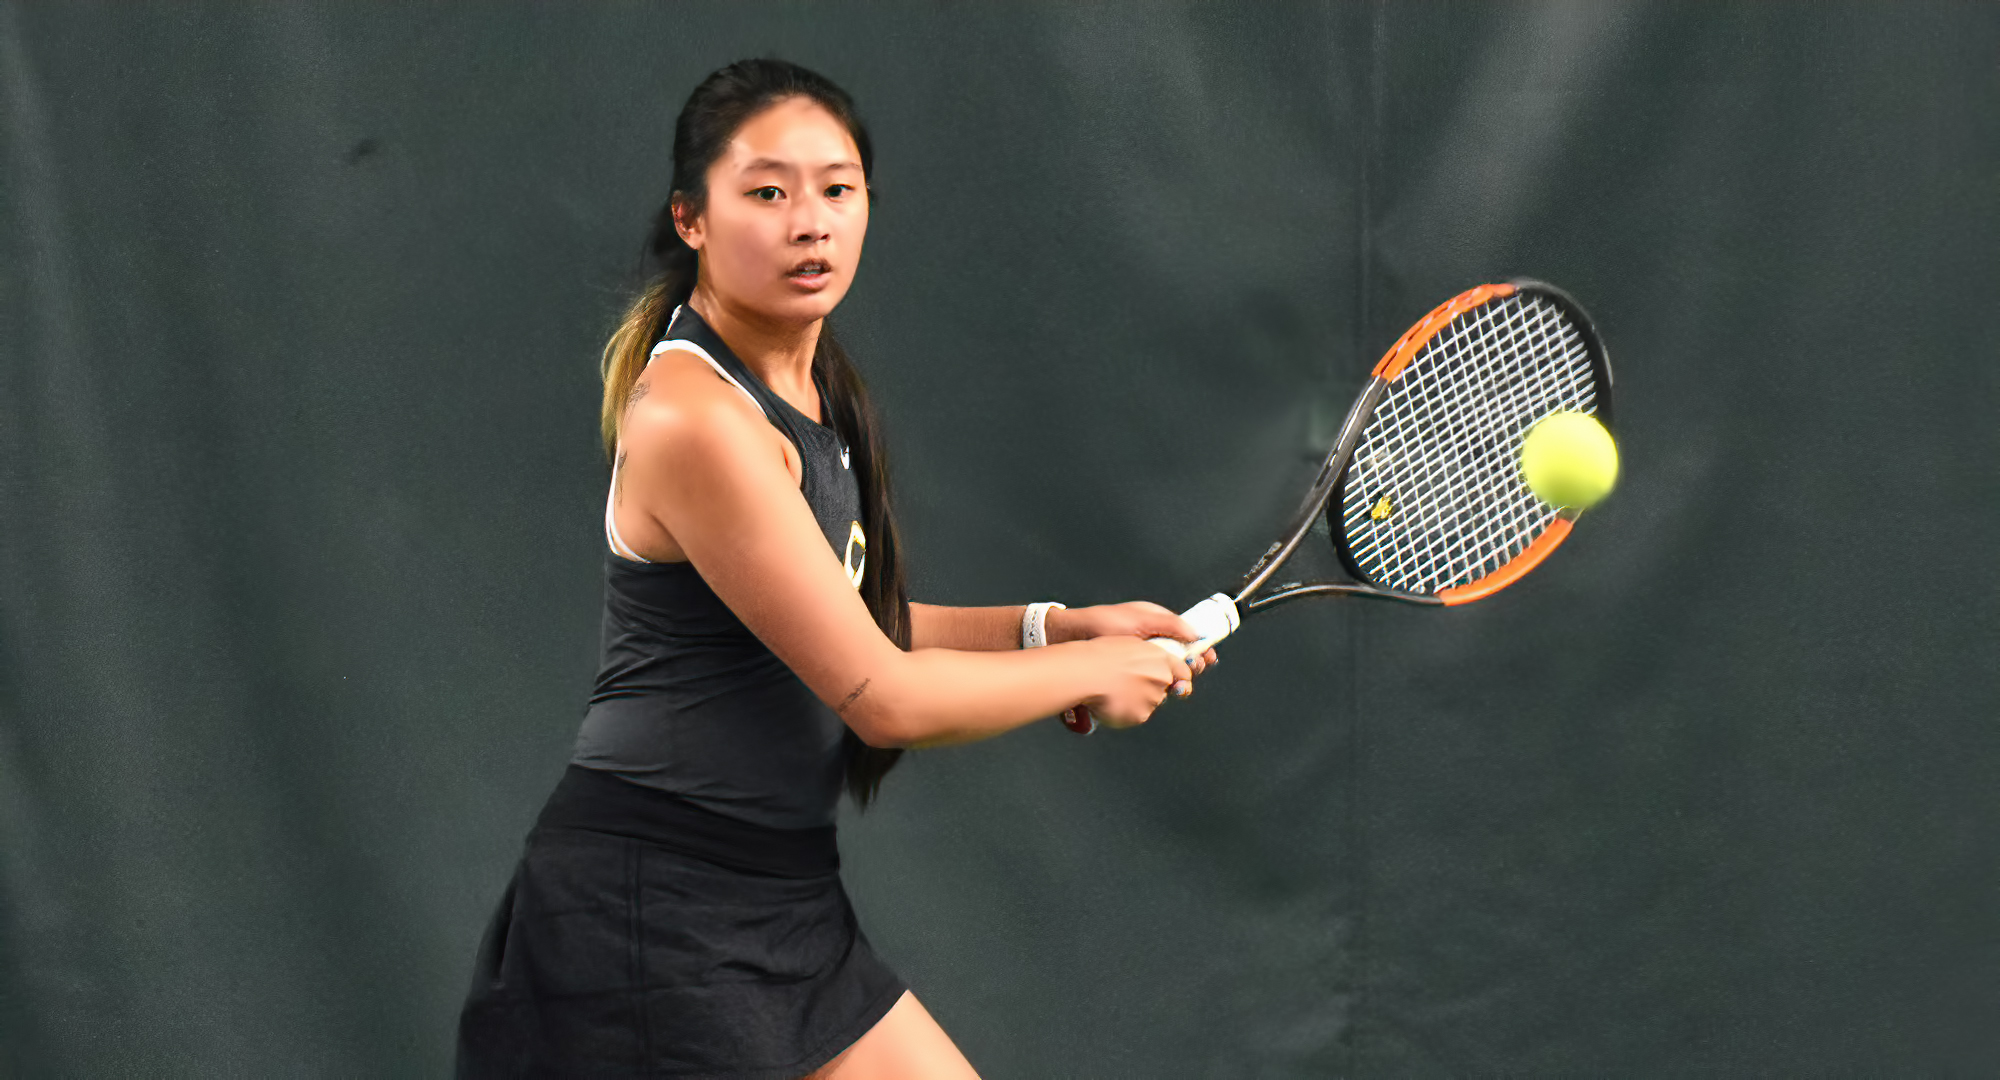 Senior Emily Savageau won both her singles and doubles bouts in the Cobber's match against St. Scholastica.